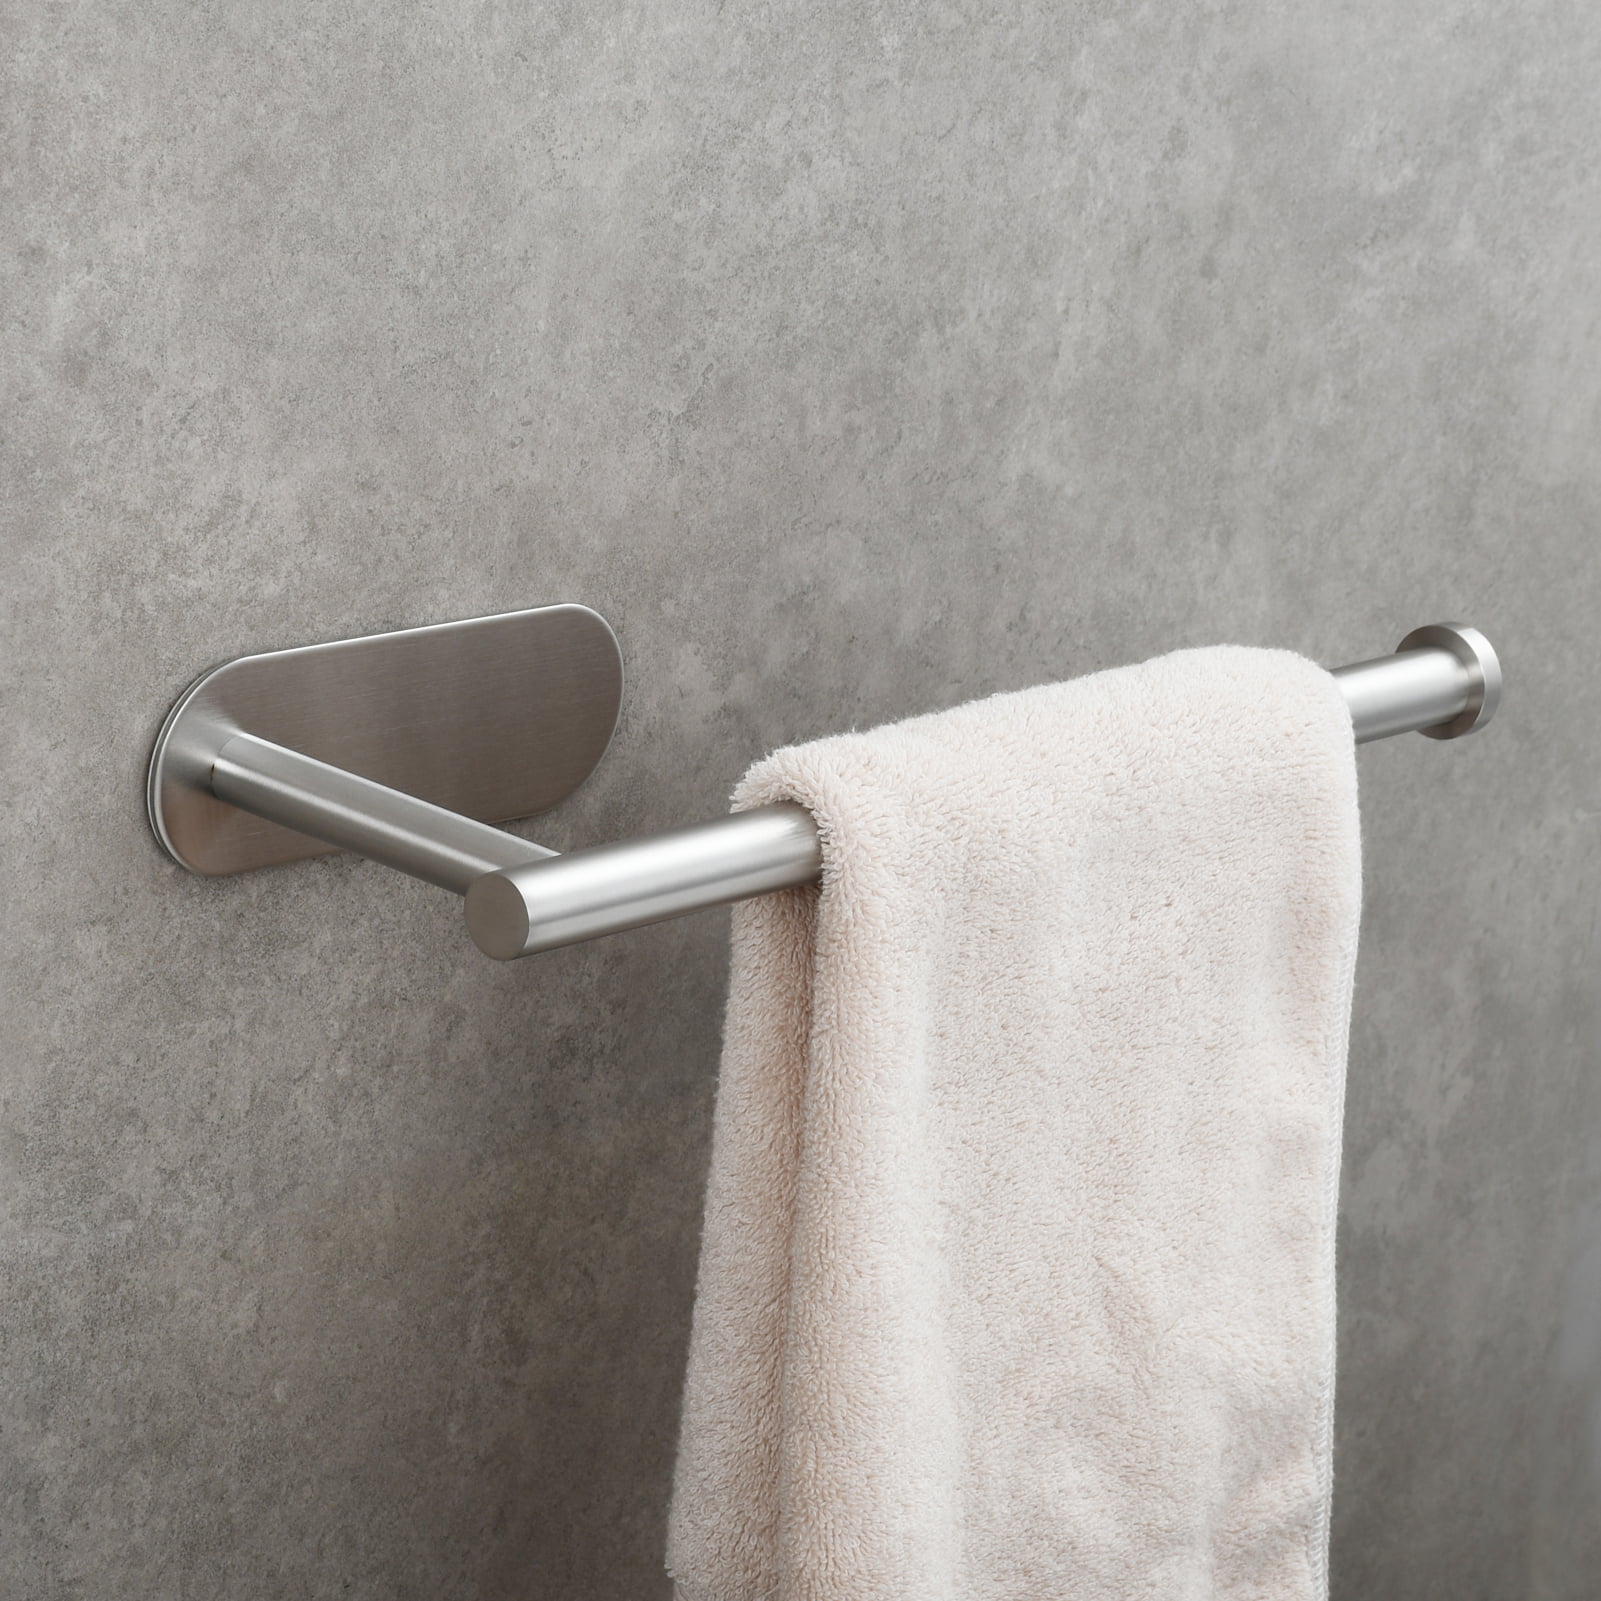 Details about   Wall Mounted Toilet Roll Holder Towel Ring Rack Tissue Paper Stand Bathroom Set 